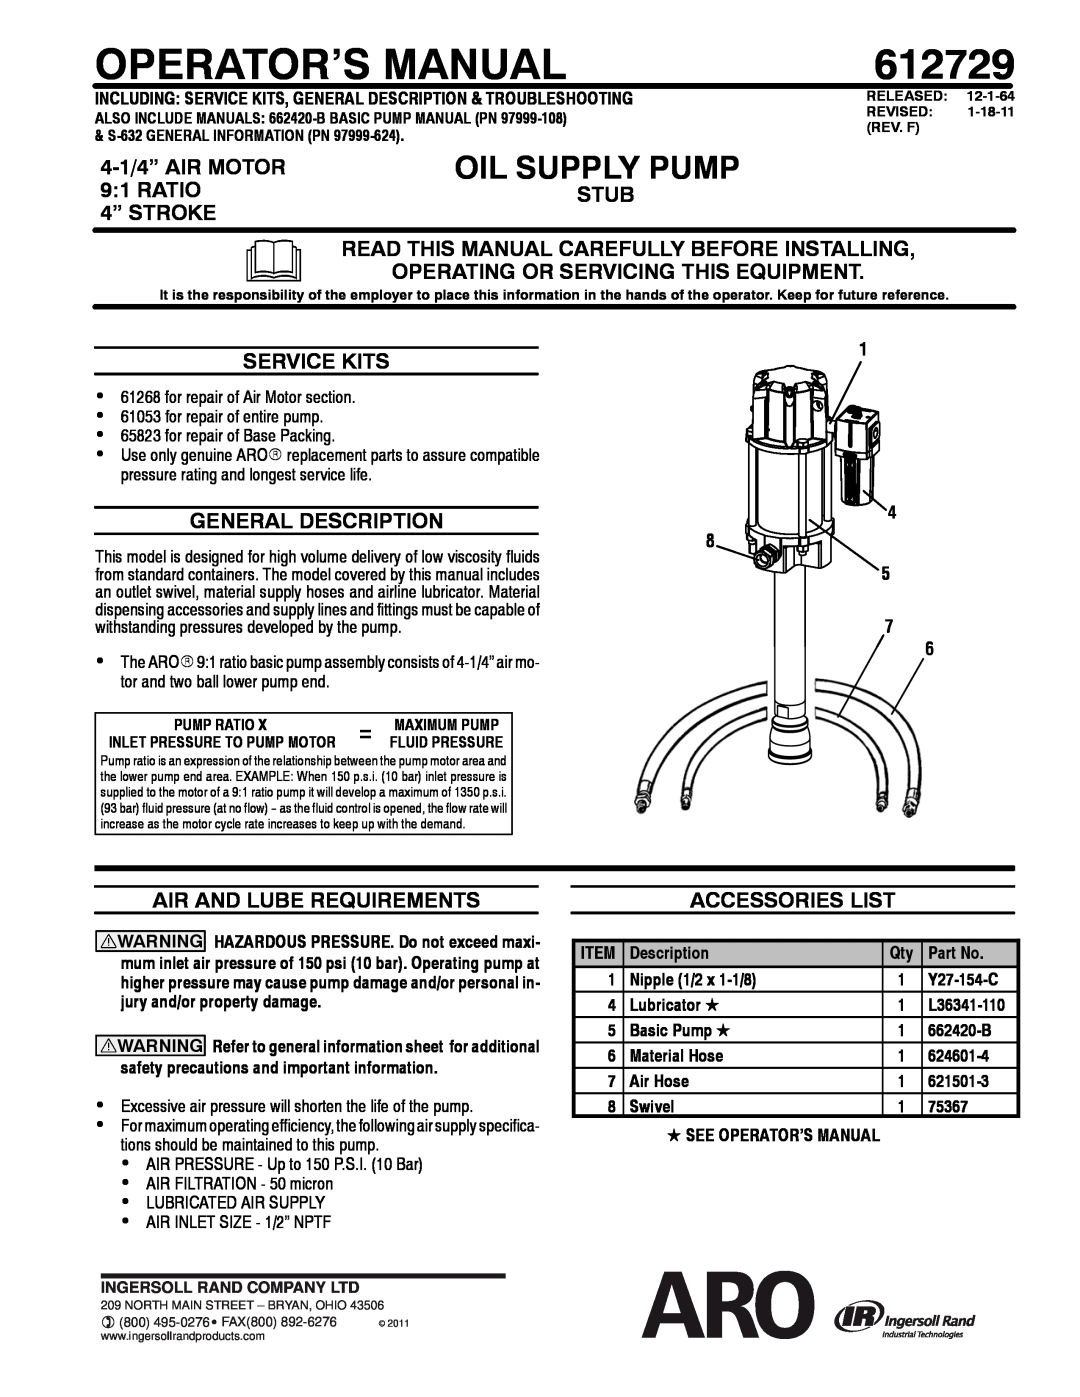 Ingersoll-Rand 612729 specifications Operator’S Manual, Oil Supply Pump 